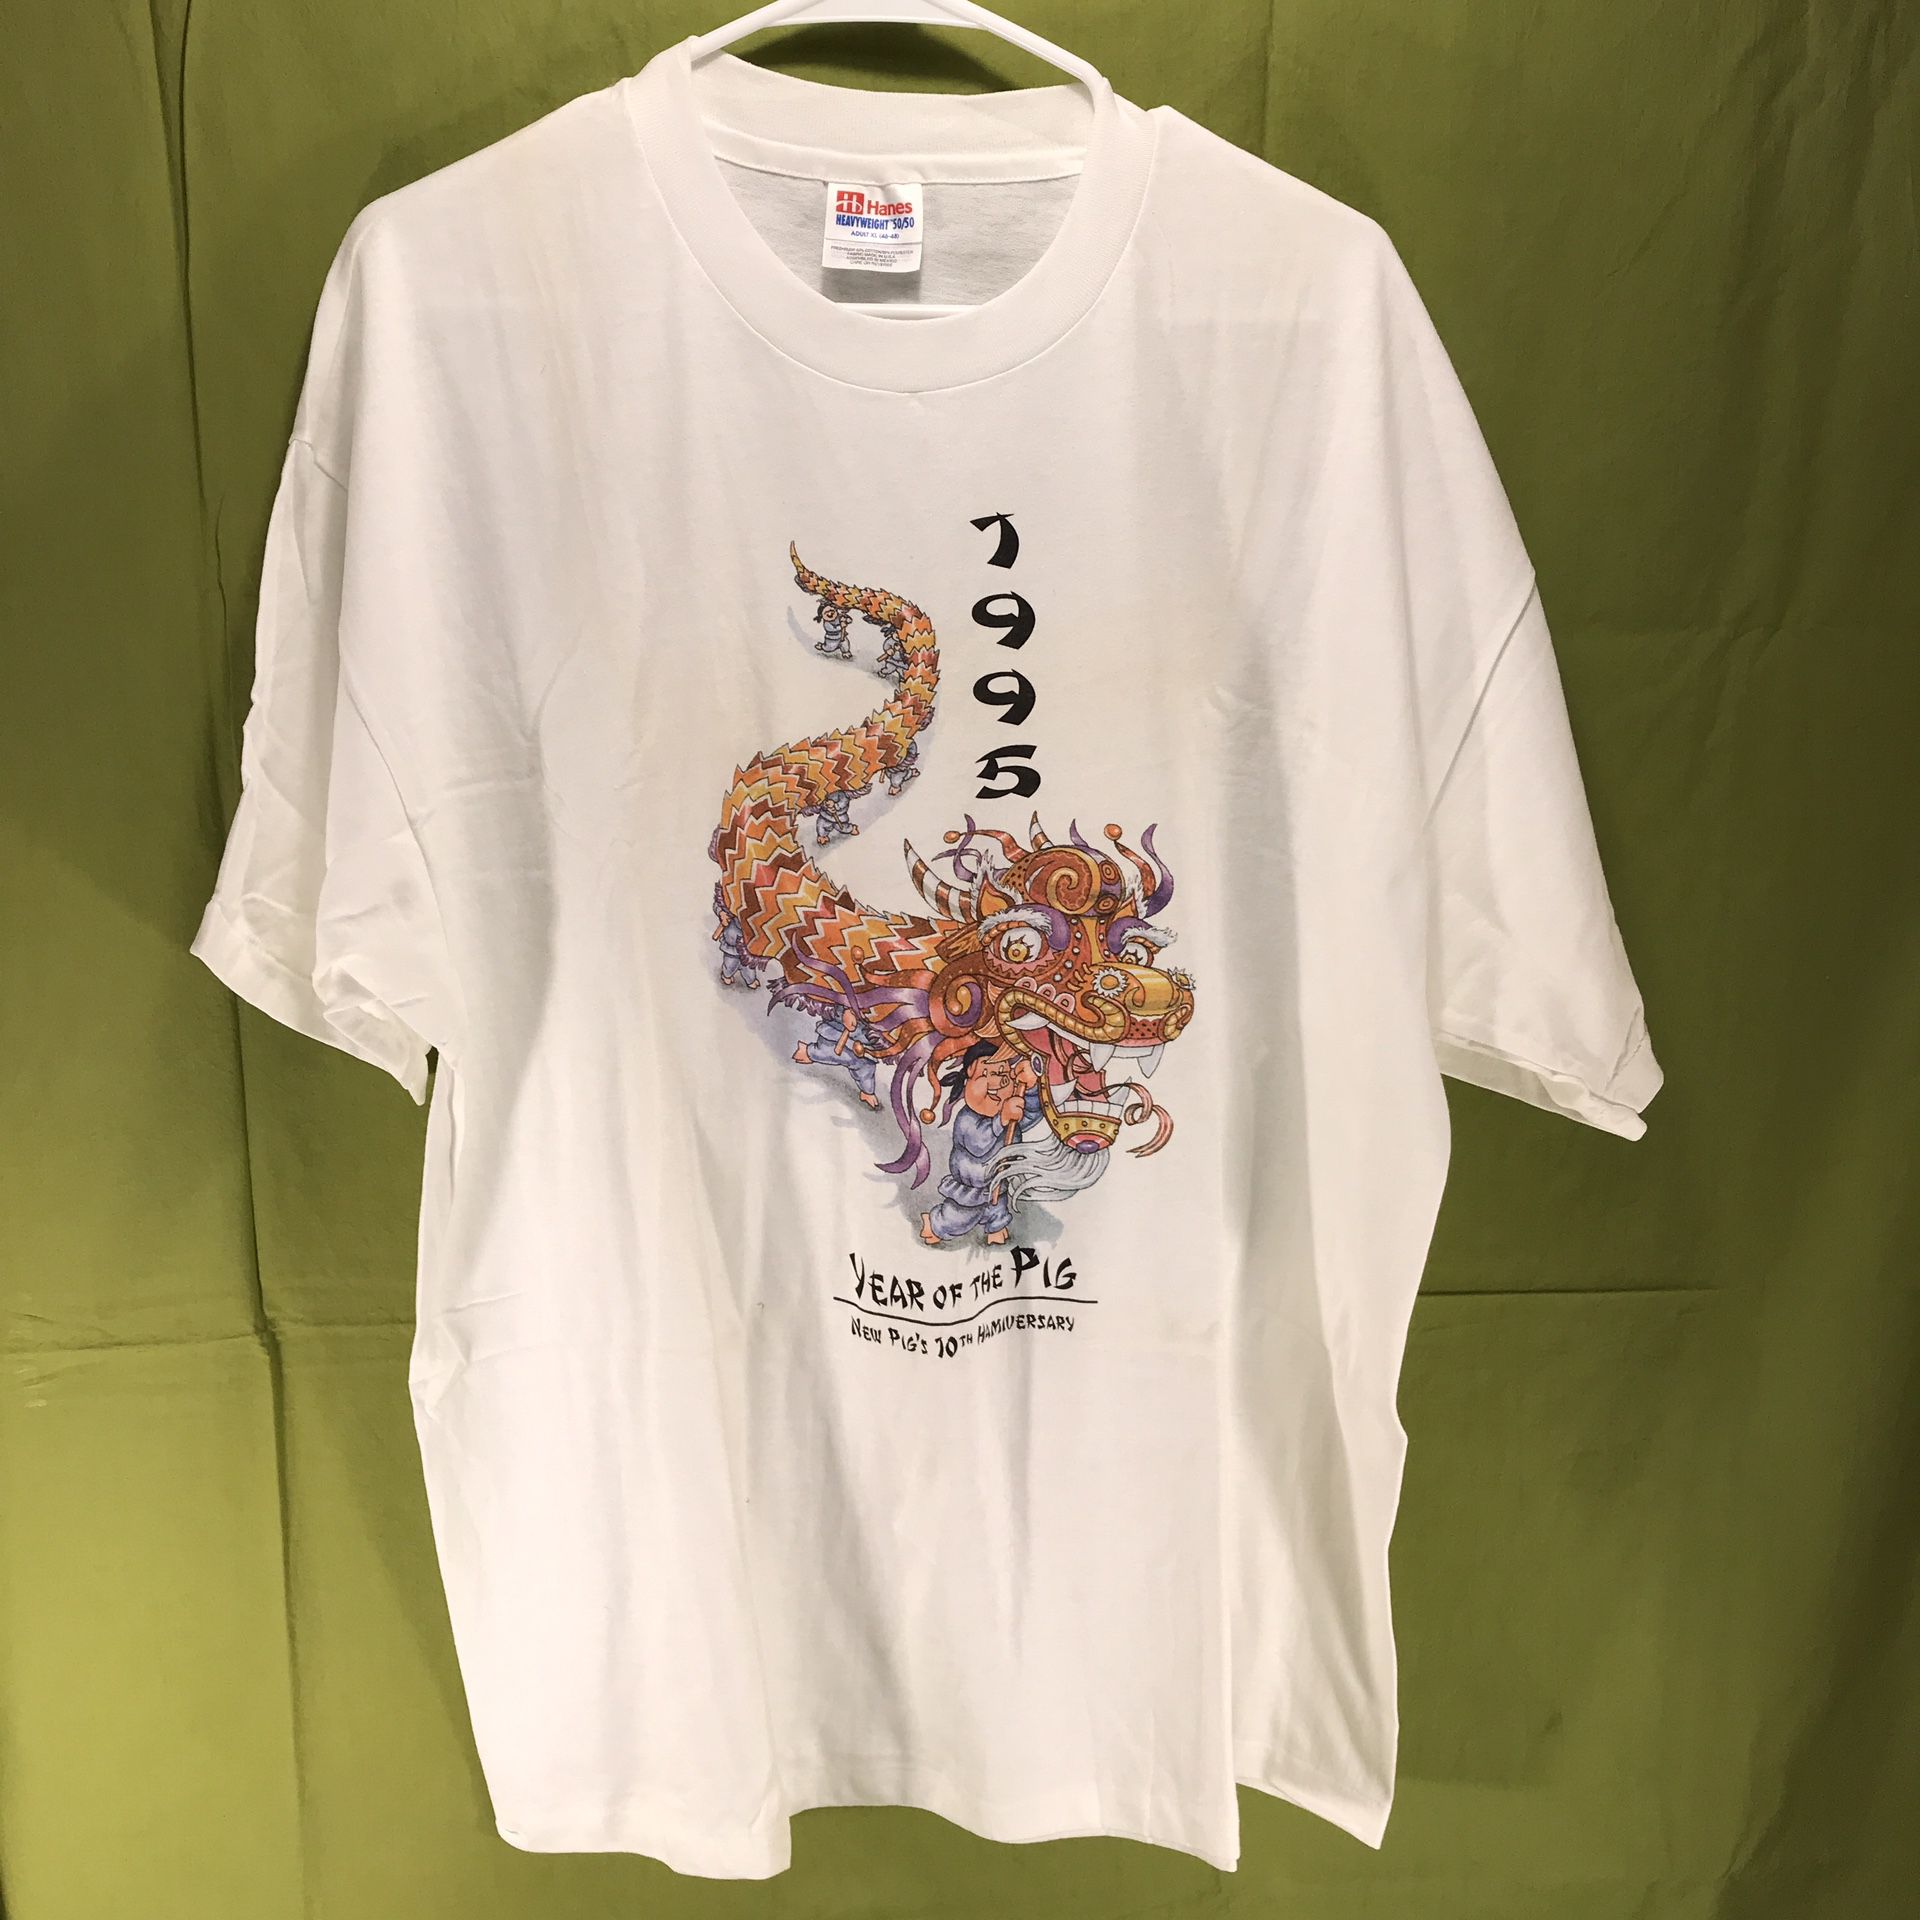 Vintage 1995 Year of the Pig T-Shirt Men’s Size XL